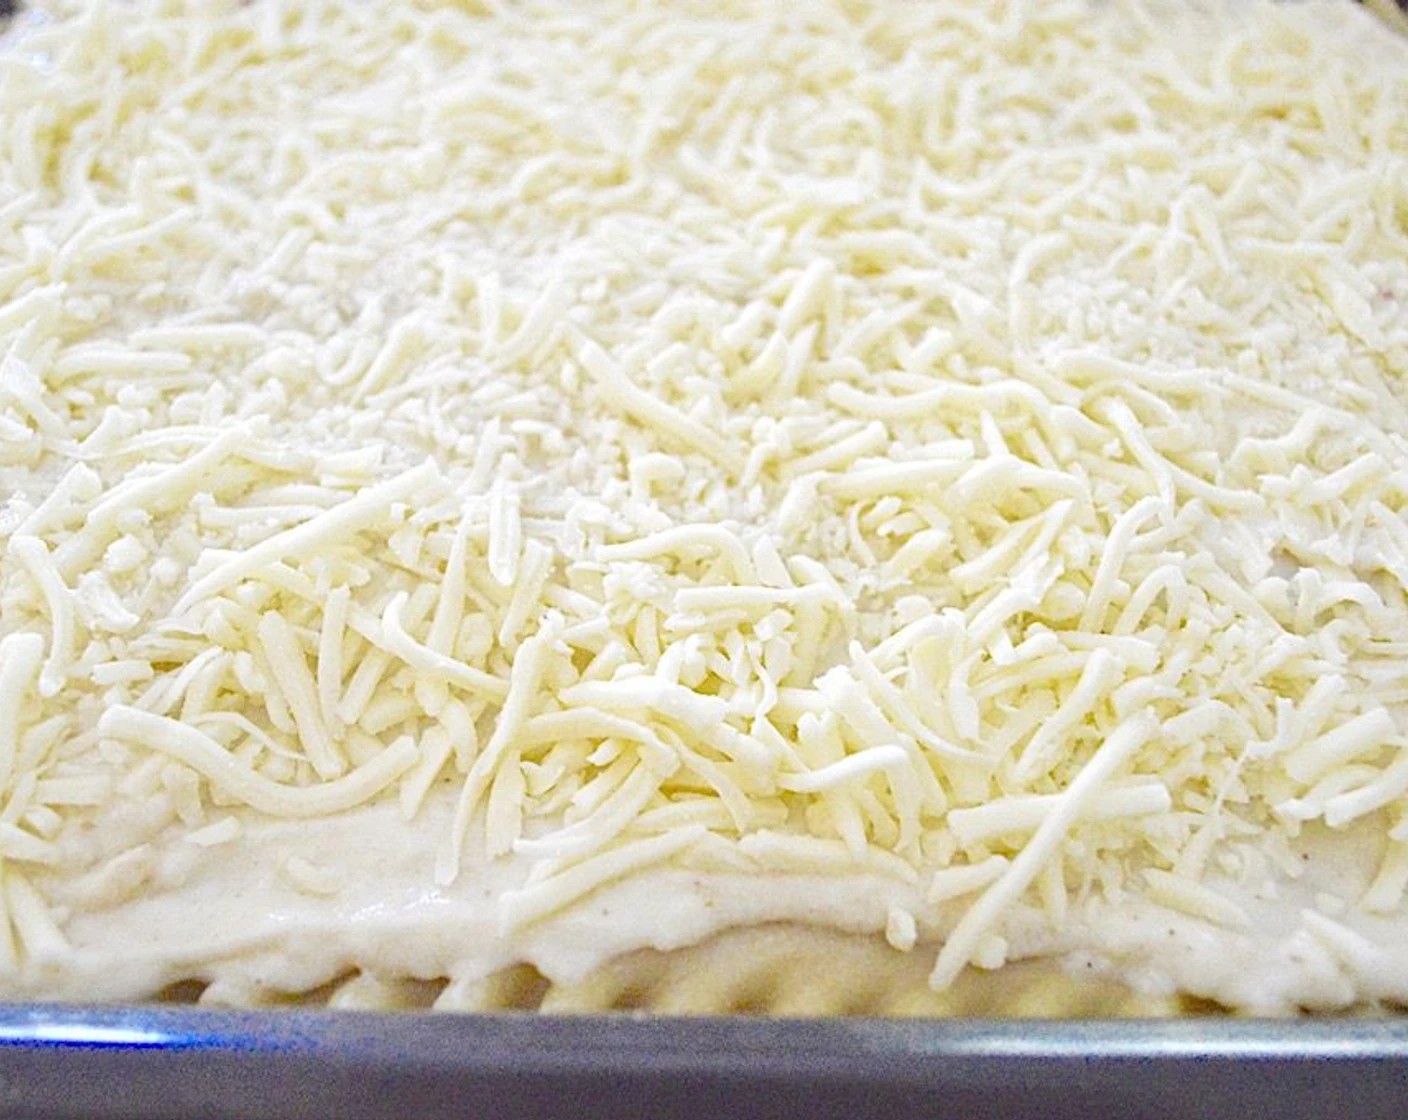 step 11 Repeat this layering twice more to have 3 layers total. Then lay out the final 4 lasagna noodles on top, followed by the remaining bechamel in a thick layer and the rest of the mozzarella.